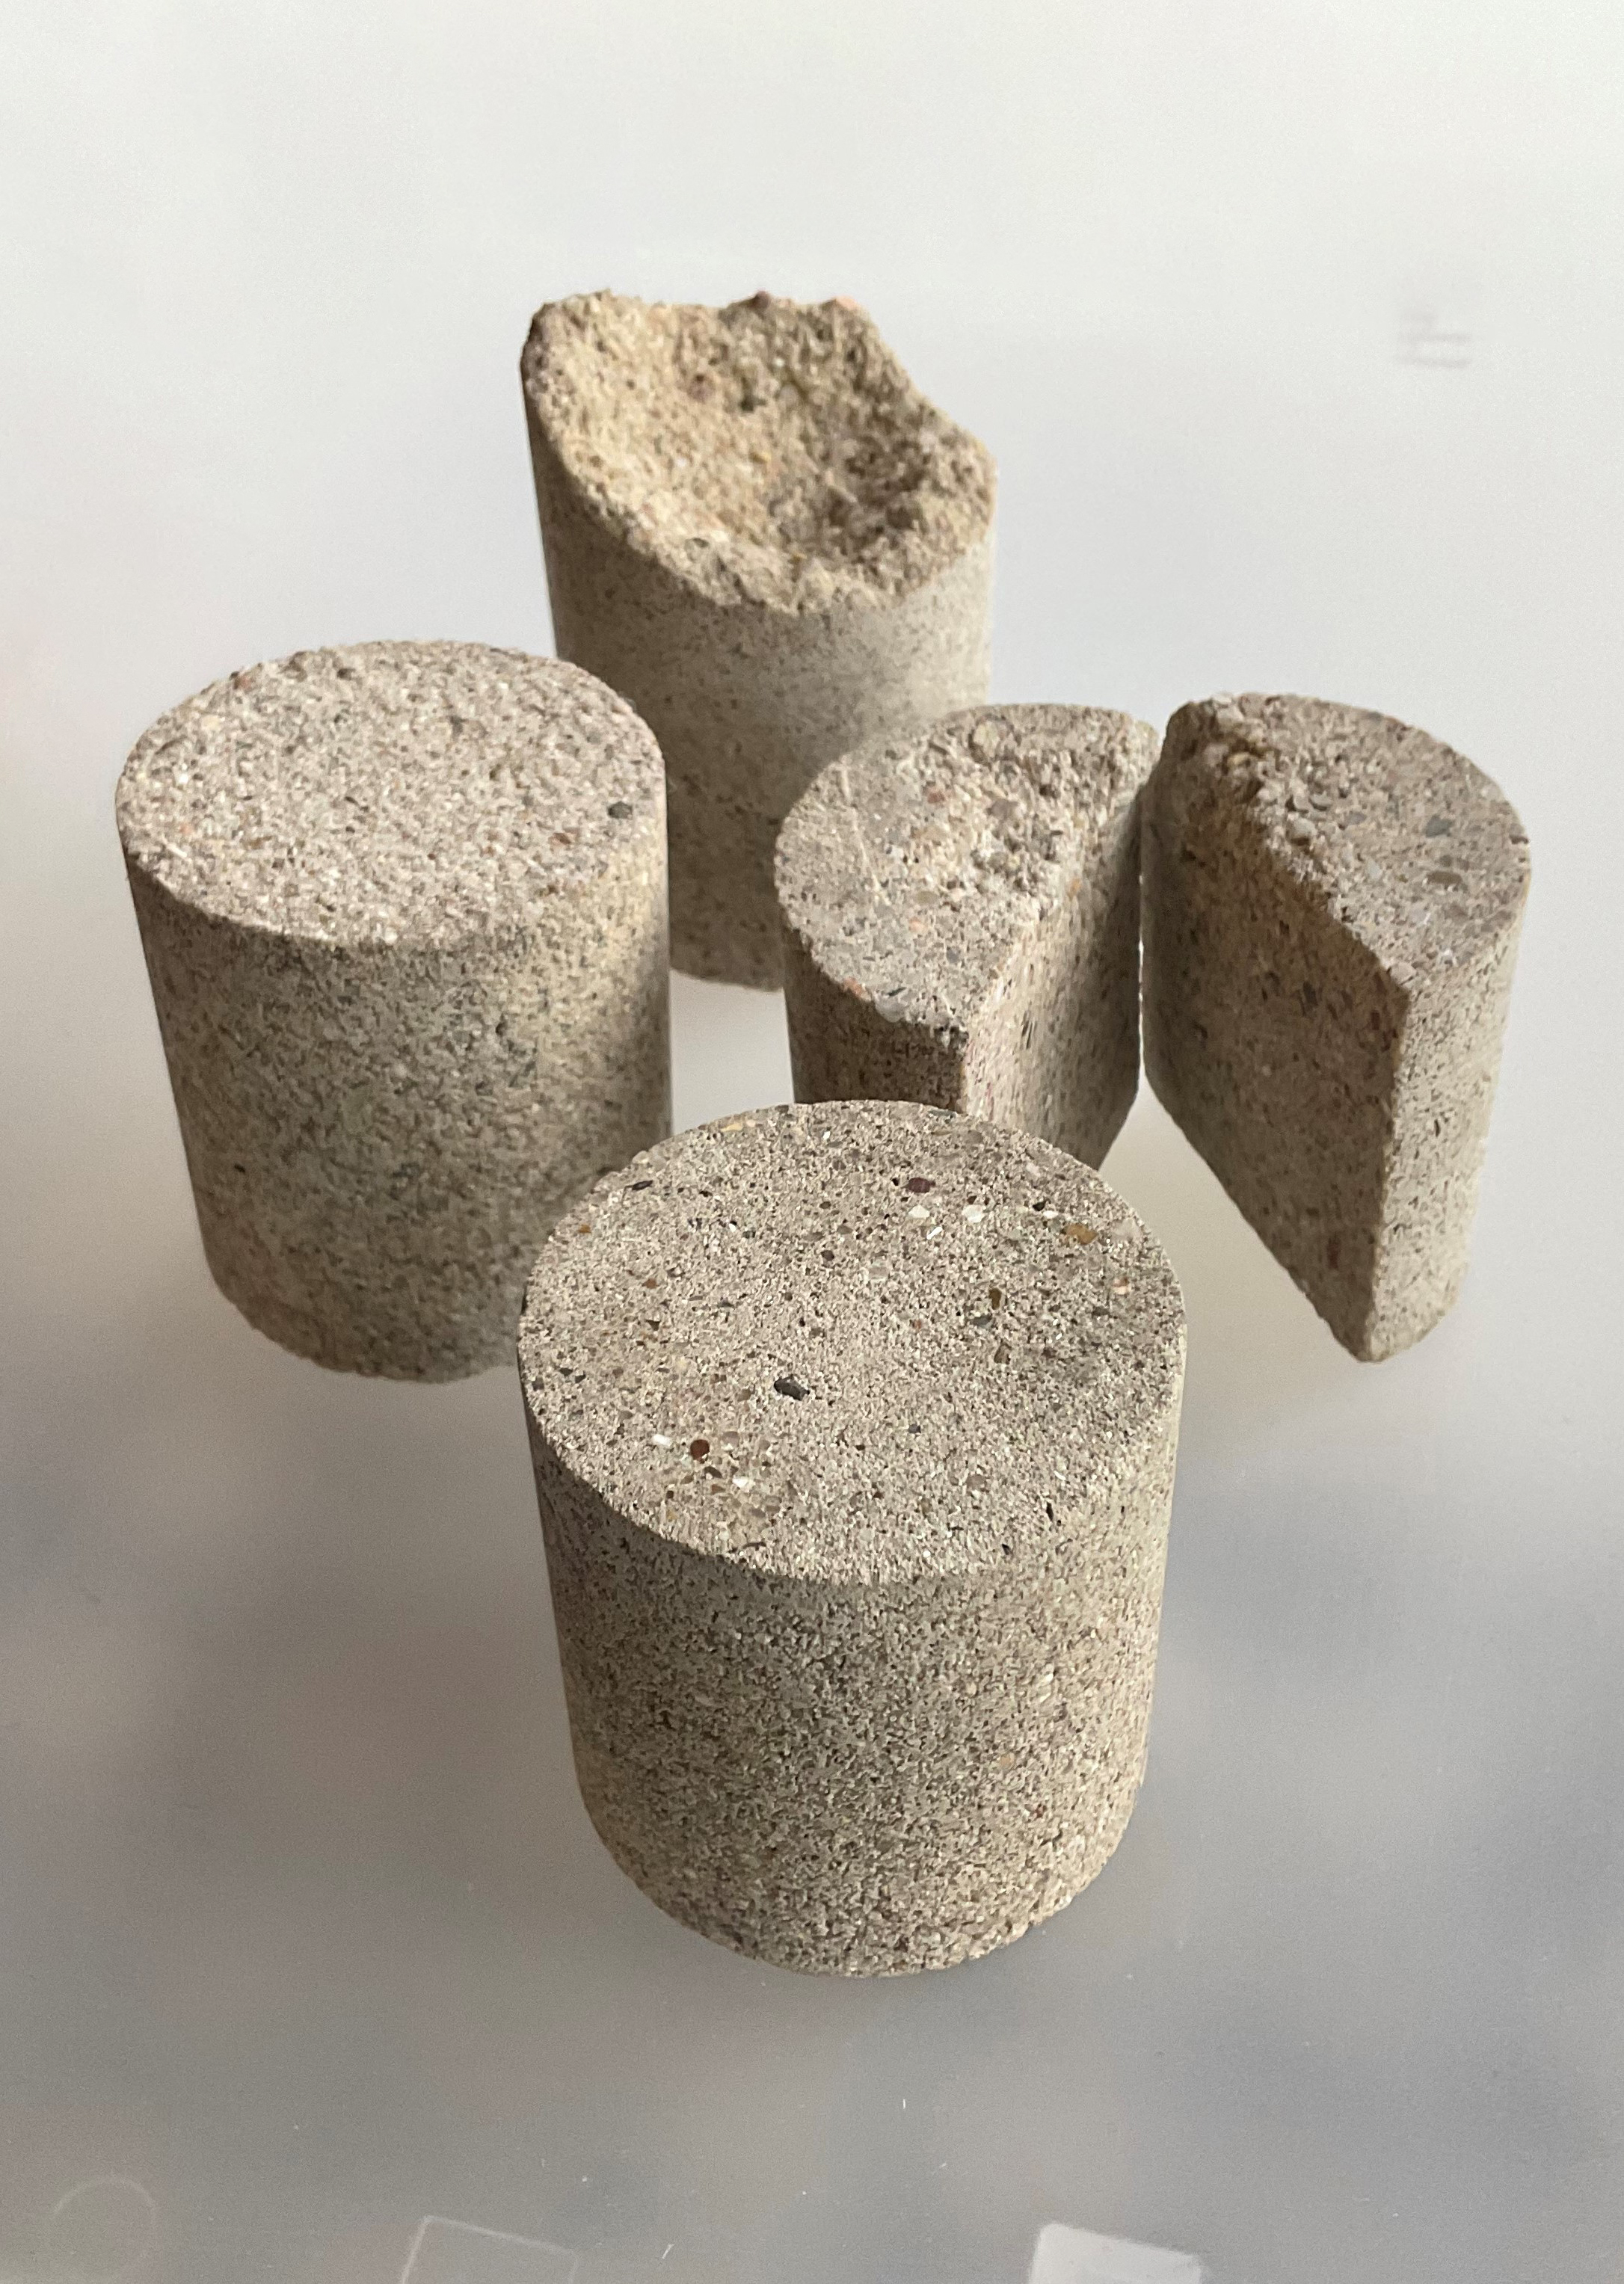 The figure shows different sized and partially cut open cylindrical parts made of bioconcrete.